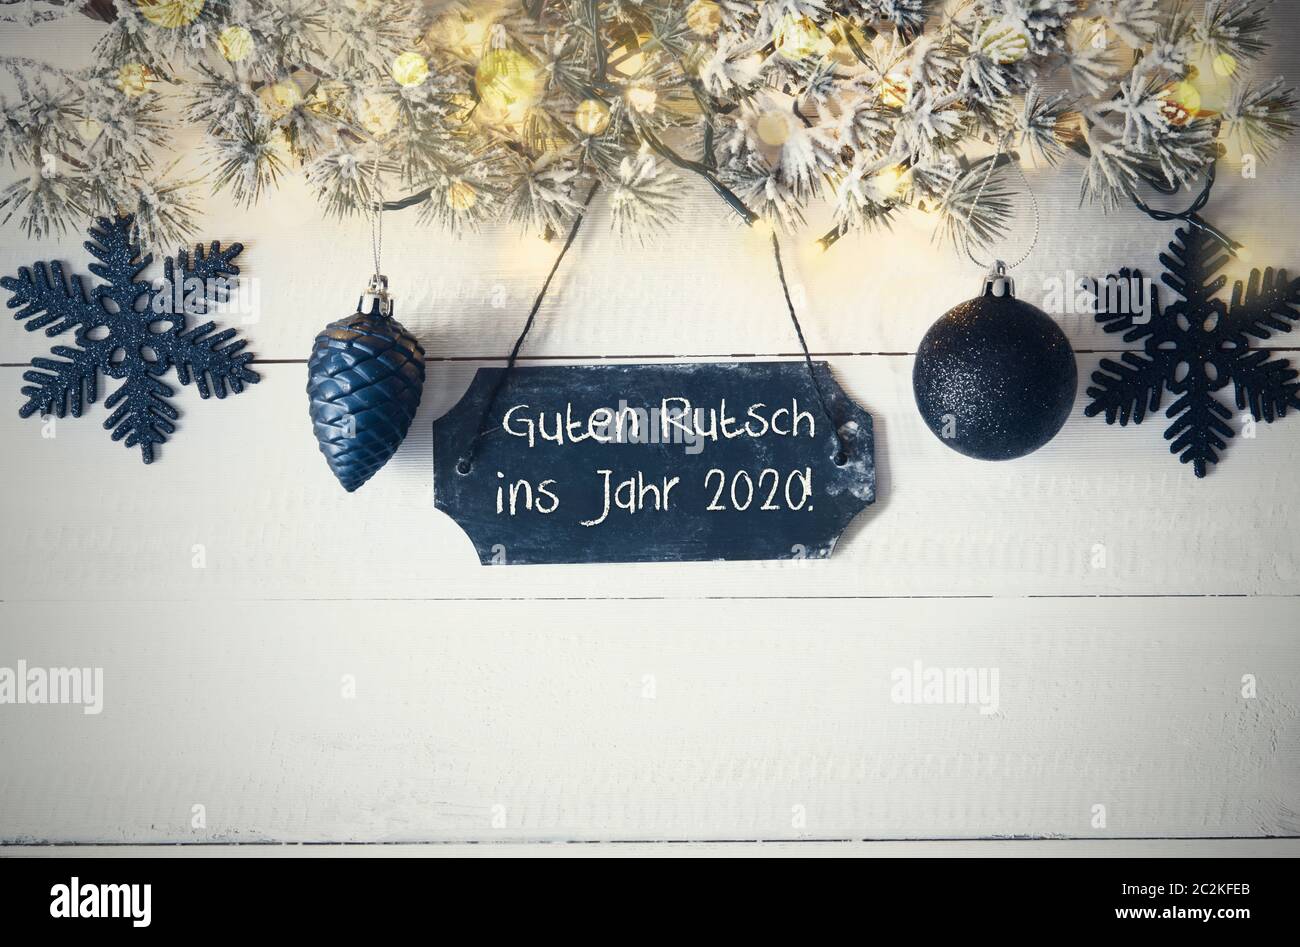 Black Chirstmas Plate With German Text Guten Rutsch Ins Jahr 2020 Means Happy New Year 2020. Fir Branch With Fairy Lights On Wooden Background. Black Stock Photo